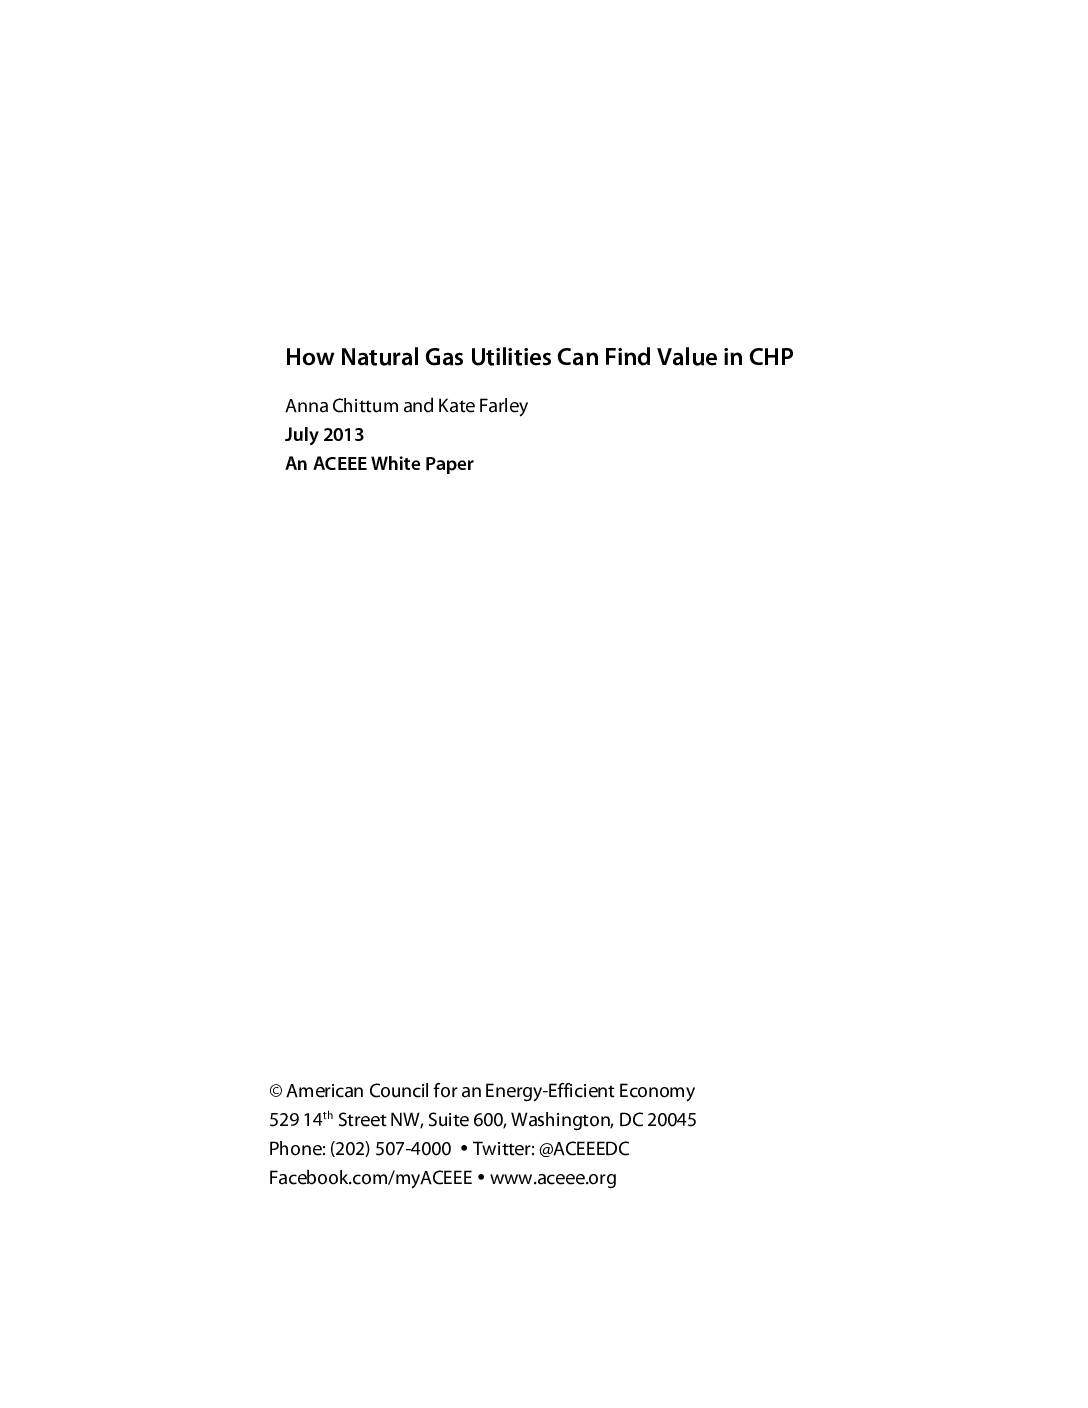 How Natural Gas Utilities Can Find Value in CHP